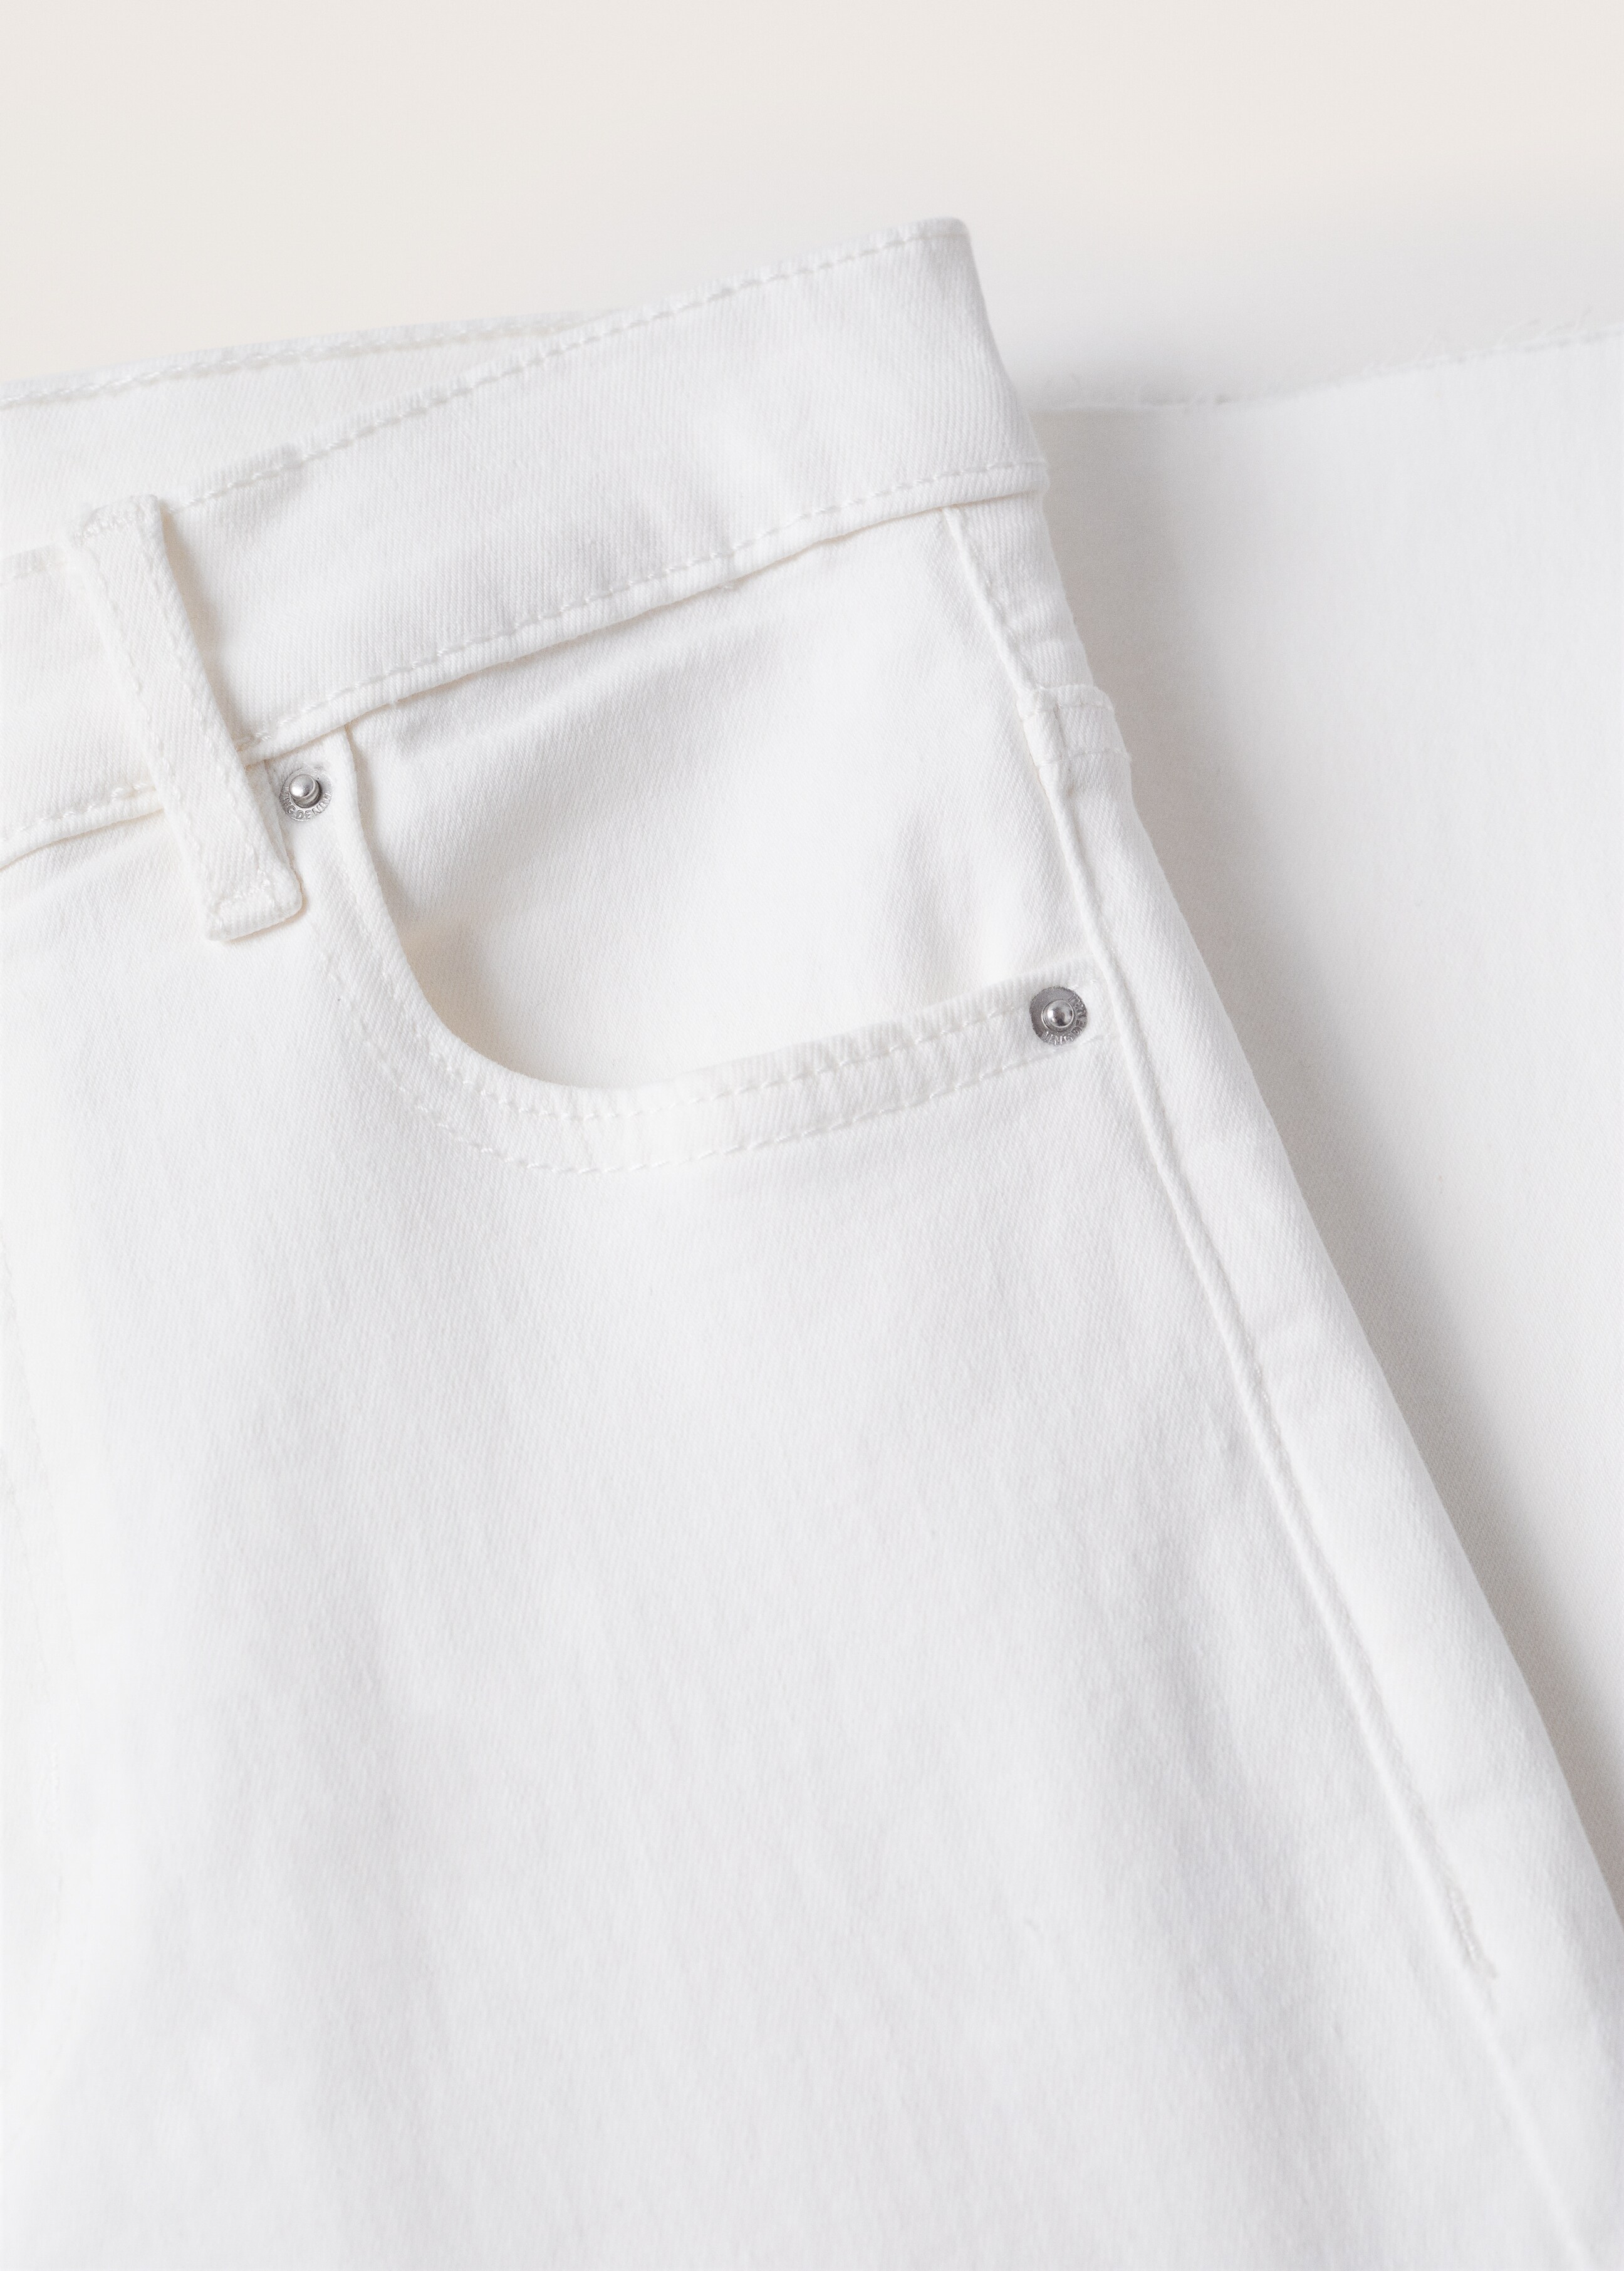 High-waist bootcut jeans - Details of the article 8